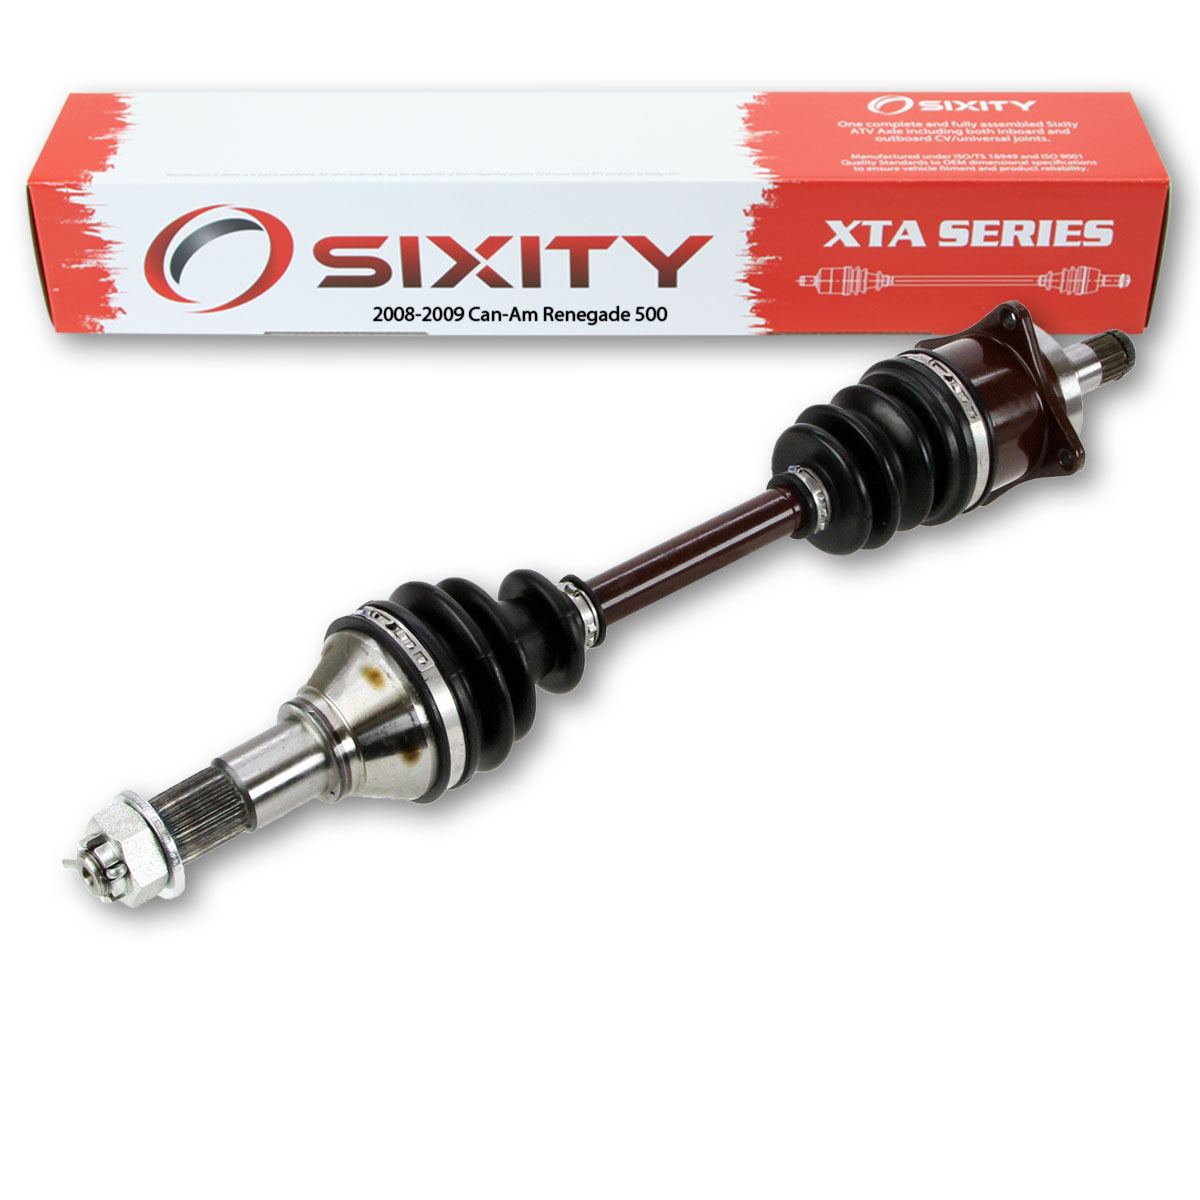 Sixity 2008-2009 Can-Am Renegade 500 4X4 Front Left XTA ATV Axle